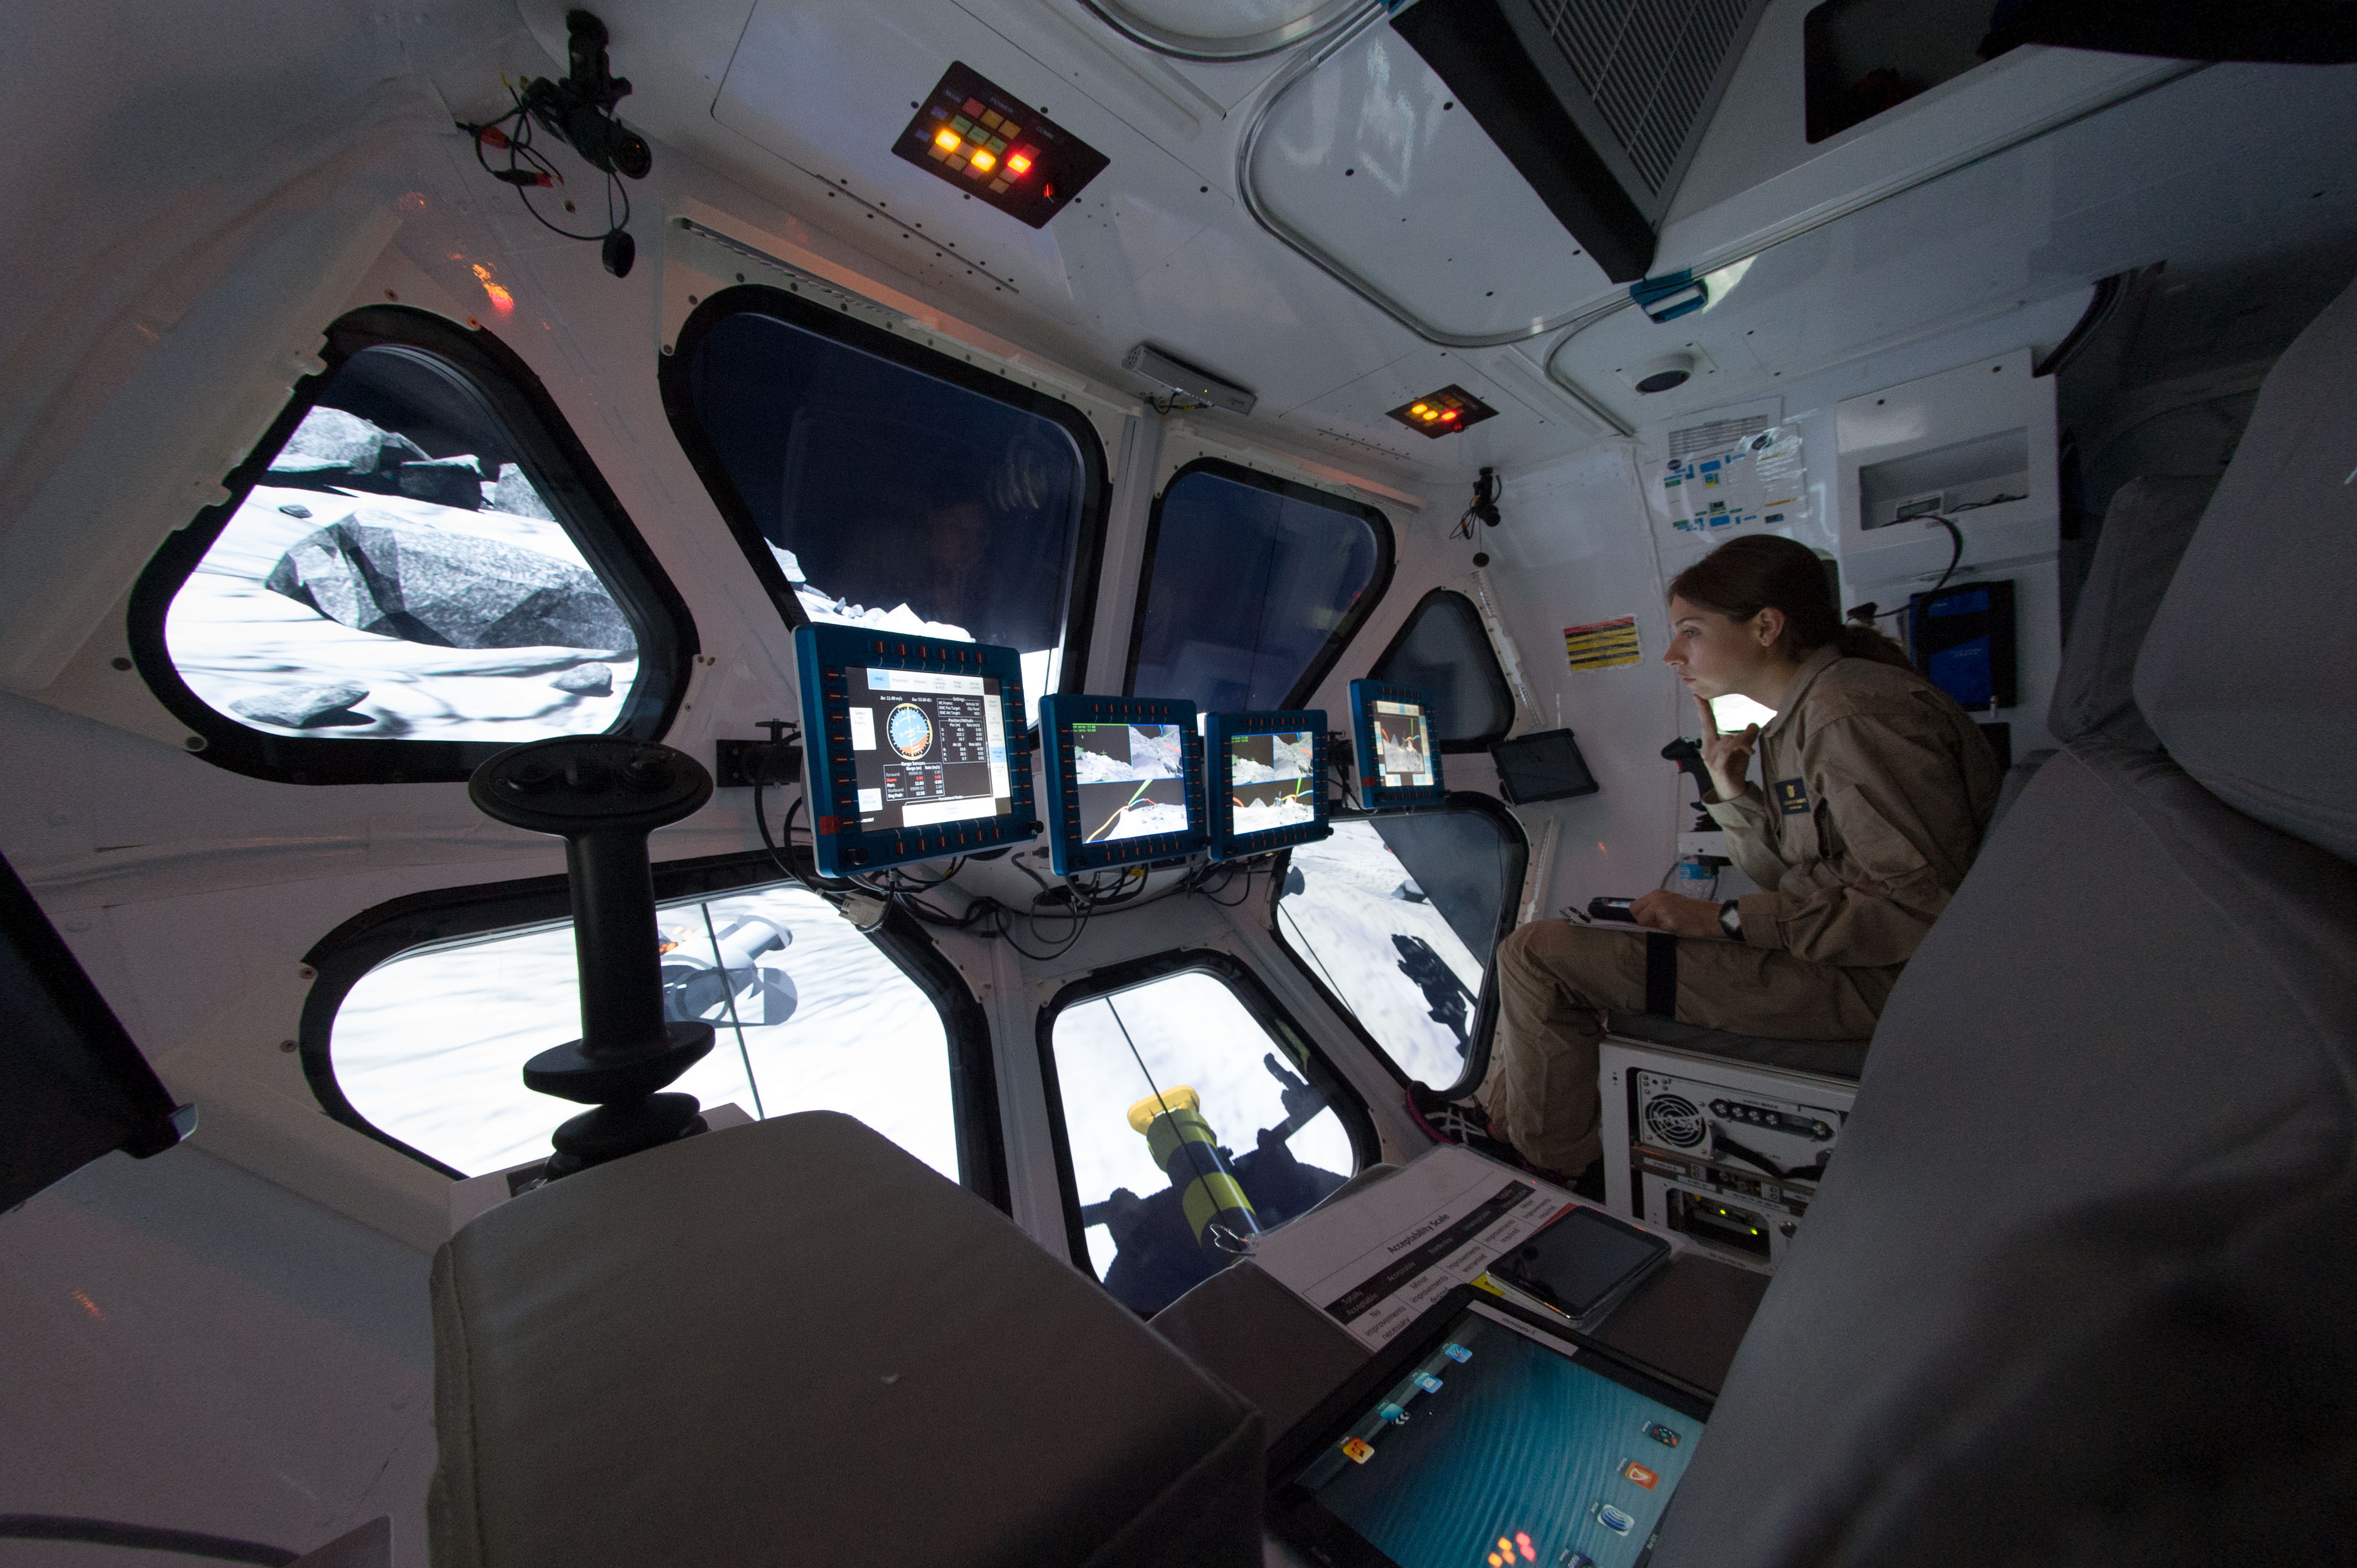 Liz Rampe, a planetary geologist and postdoctoral researcher, pilots the Multi-Mission Space Exploration Vehicle (MMSEV) down to asteroids spinning at different rates as part of the 2012 Research and Technology Studies (RATS) at Johnson Space Center.